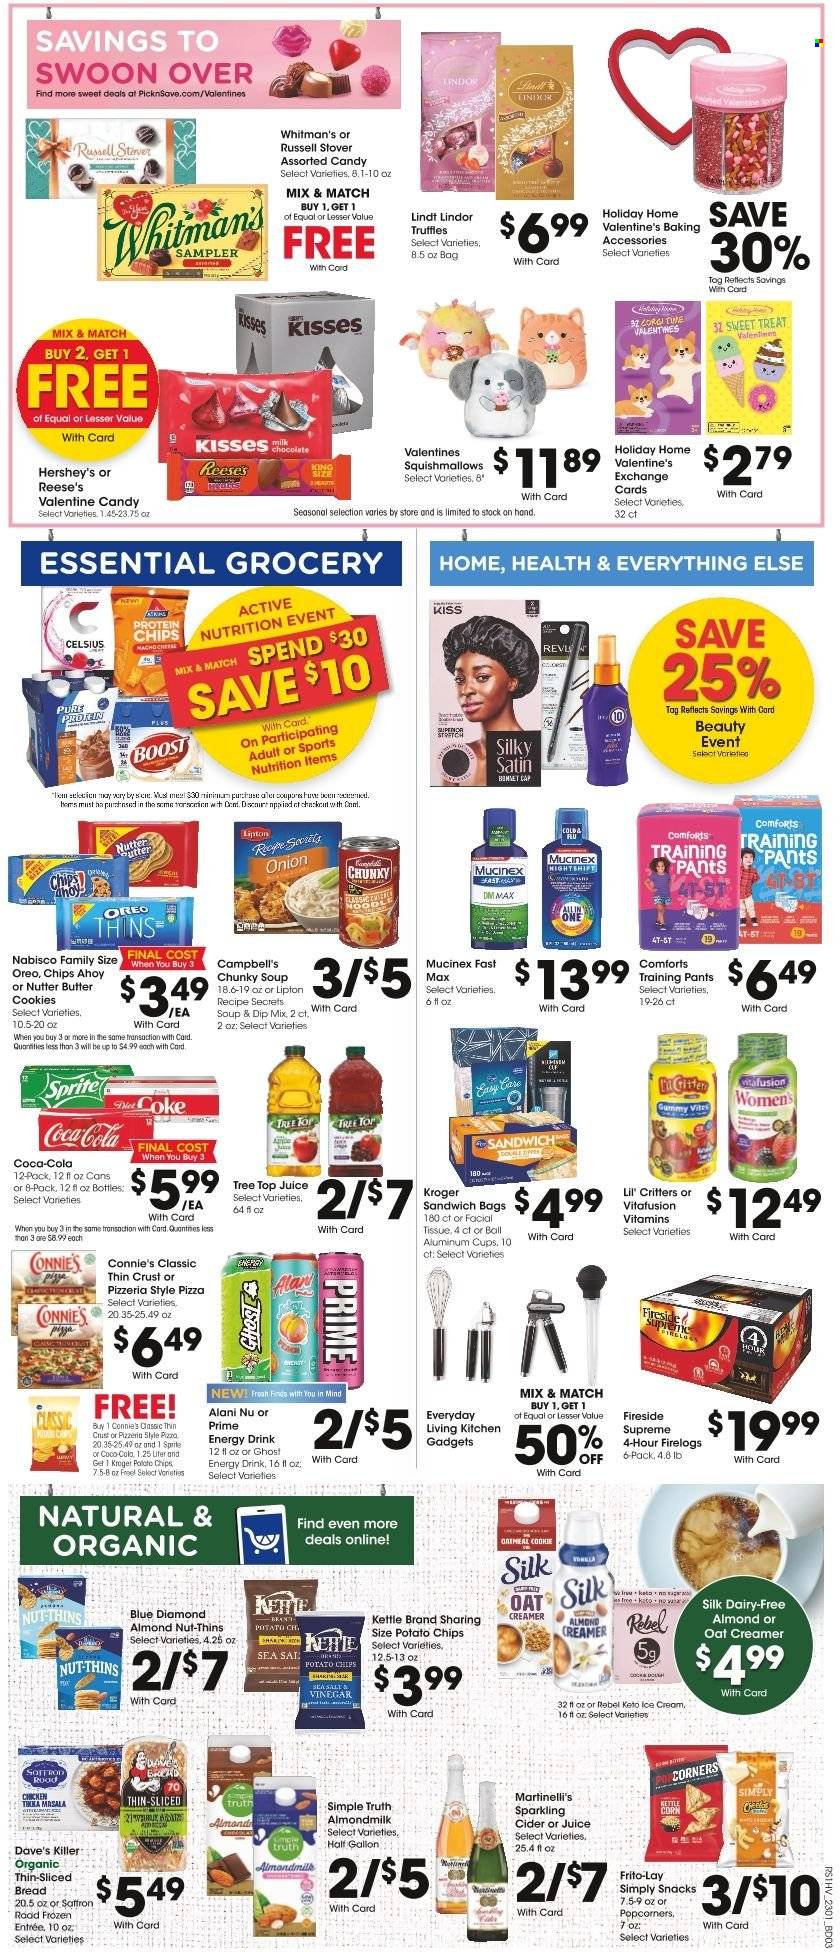 thumbnail - Pick ‘n Save Flyer - 02/01/2023 - 02/07/2023 - Sales products - bread, Campbell's, pizza, soup, Tikka Masala, Oreo, almond milk, milk, Silk, creamer, almond creamer, ice cream, Reese's, Hershey's, Enlightened lce Cream, cookies, butter cookies, snack, Lindt, Lindor, truffles, potato chips, Thins, popcorn, Frito-Lay, Blue Diamond, Coca-Cola, Sprite, juice, energy drink, Lipton, Diet Coke, Boost, sparkling cider, sparkling wine, cider, pants, baby pants, tissues, baking accessories, cup, Squishmallows, Mucinex. Page 5.